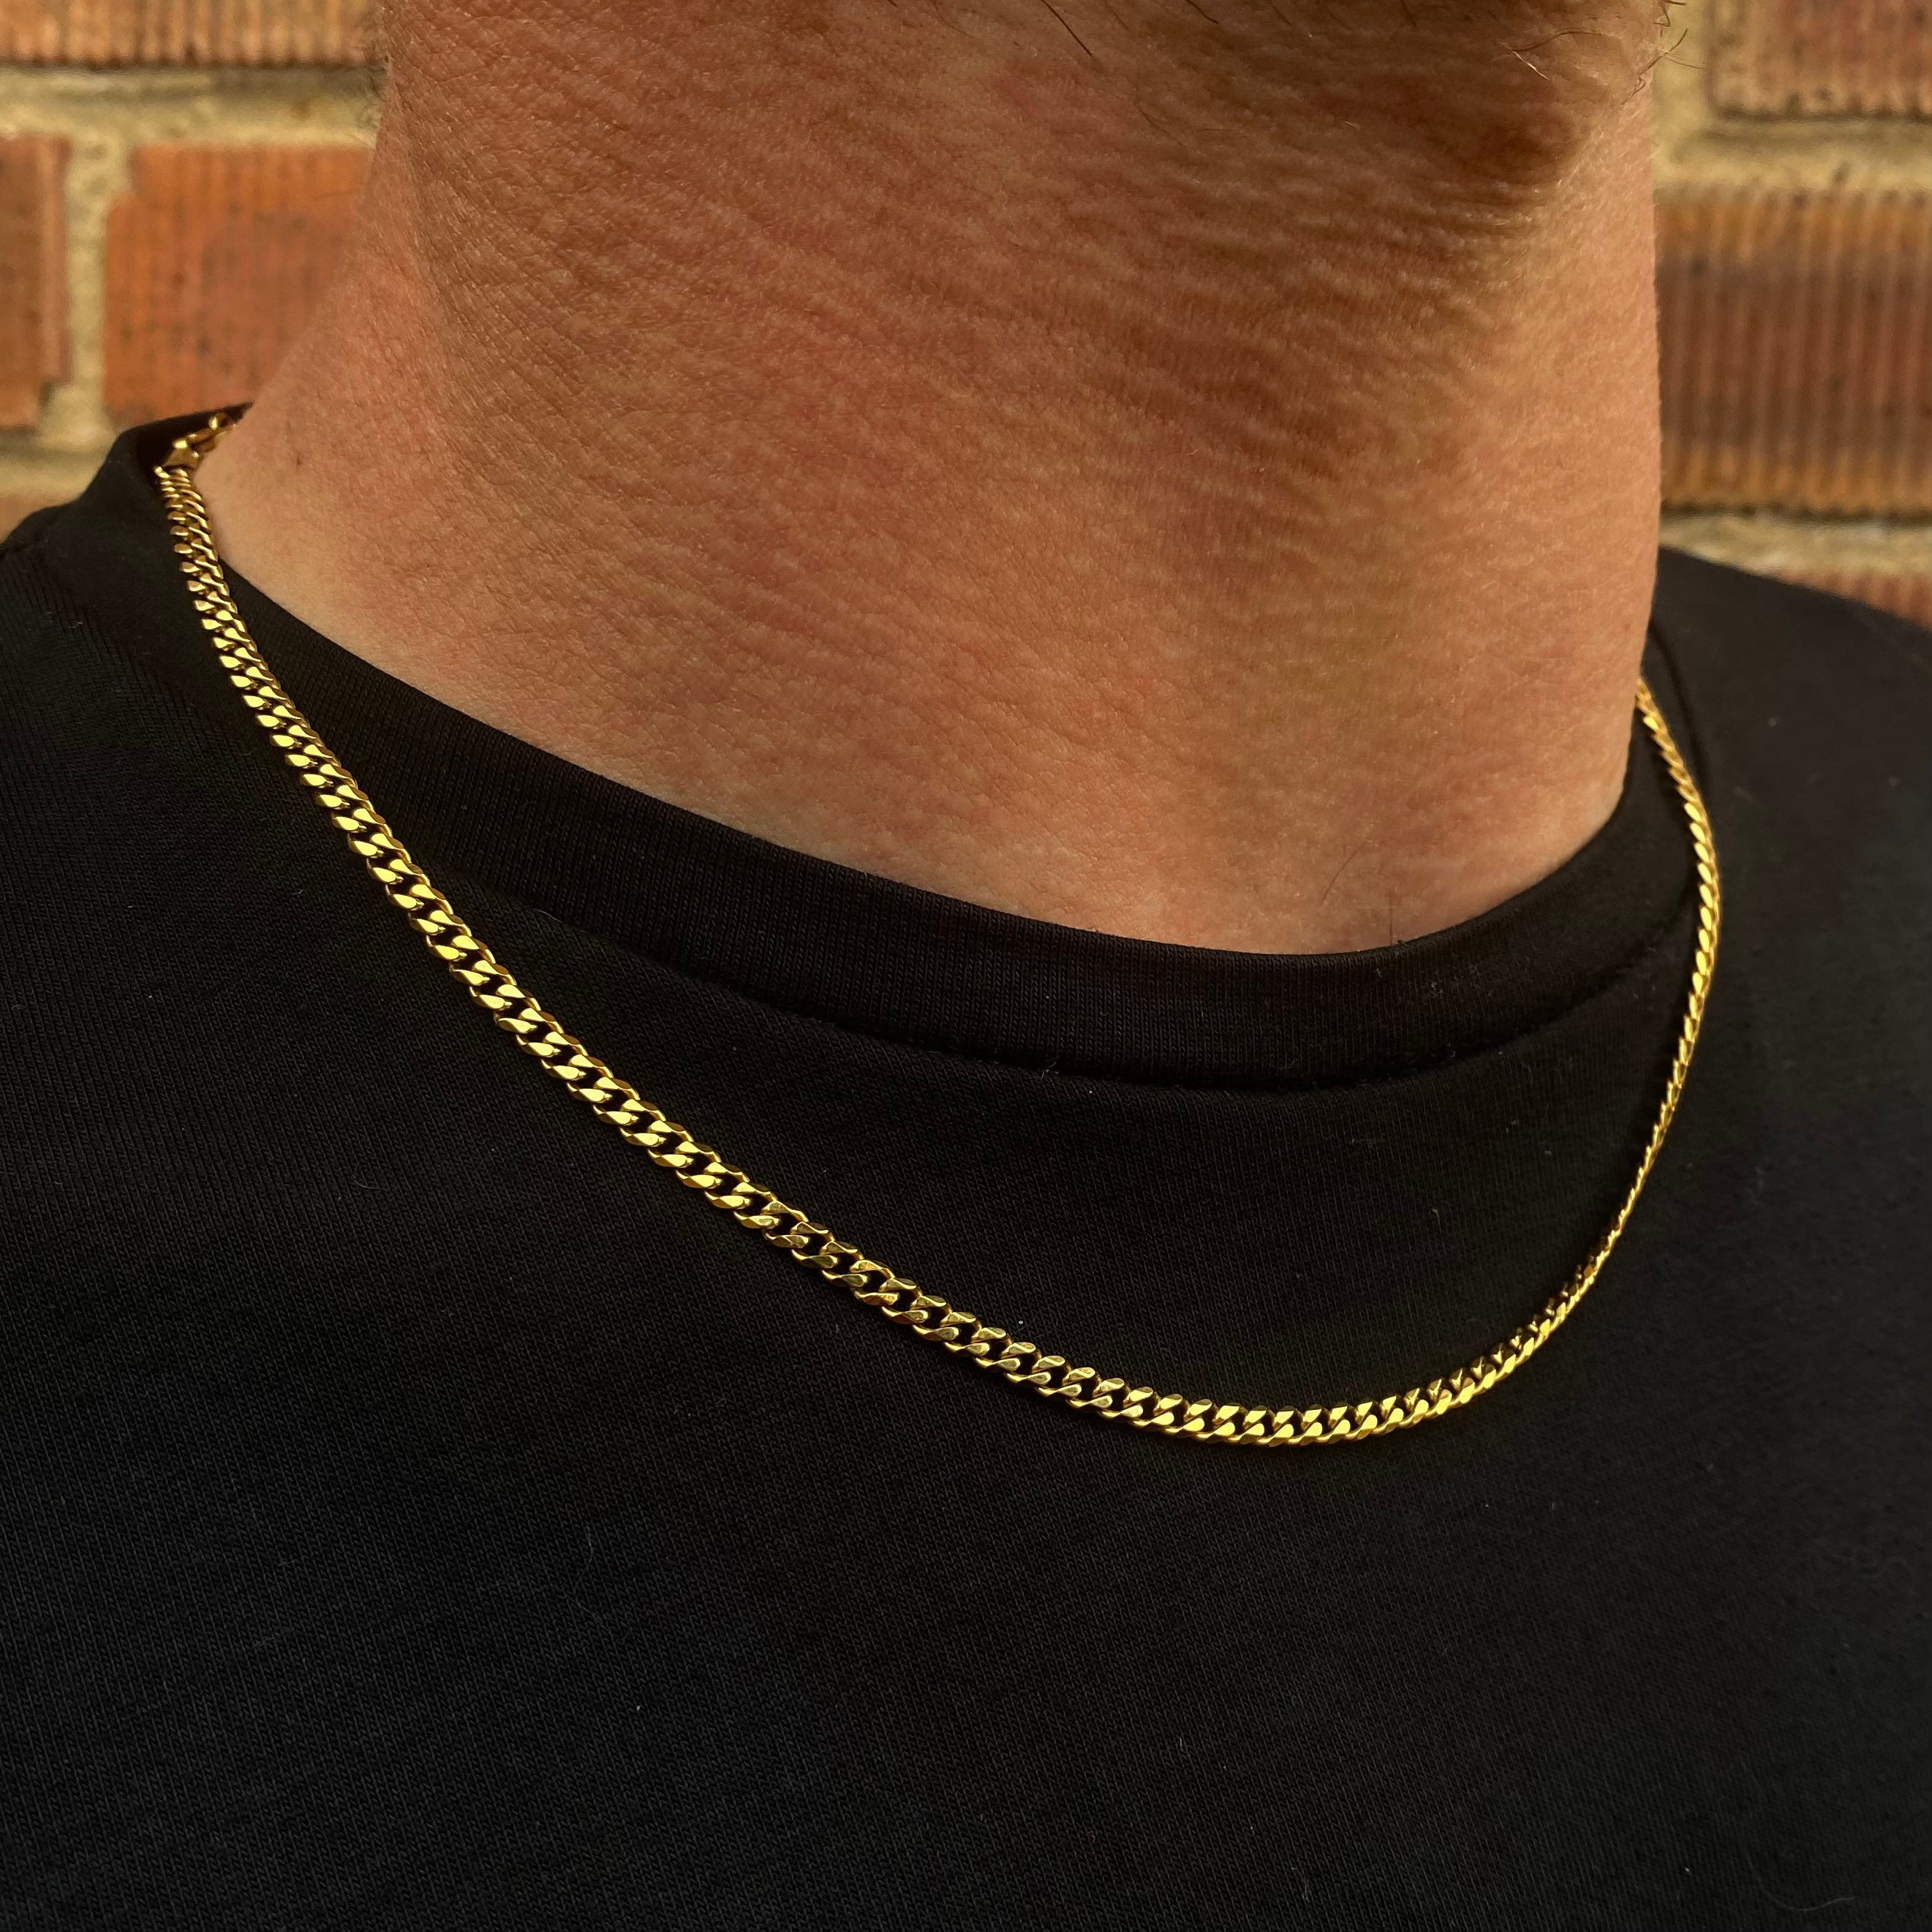 3mm Gold Chain Necklace, Short 16 20 Thin Choker Necklace Chain, Mens Gold  Curb Chain, Gold Chains, Mens Jewelry by Twistedpendant 